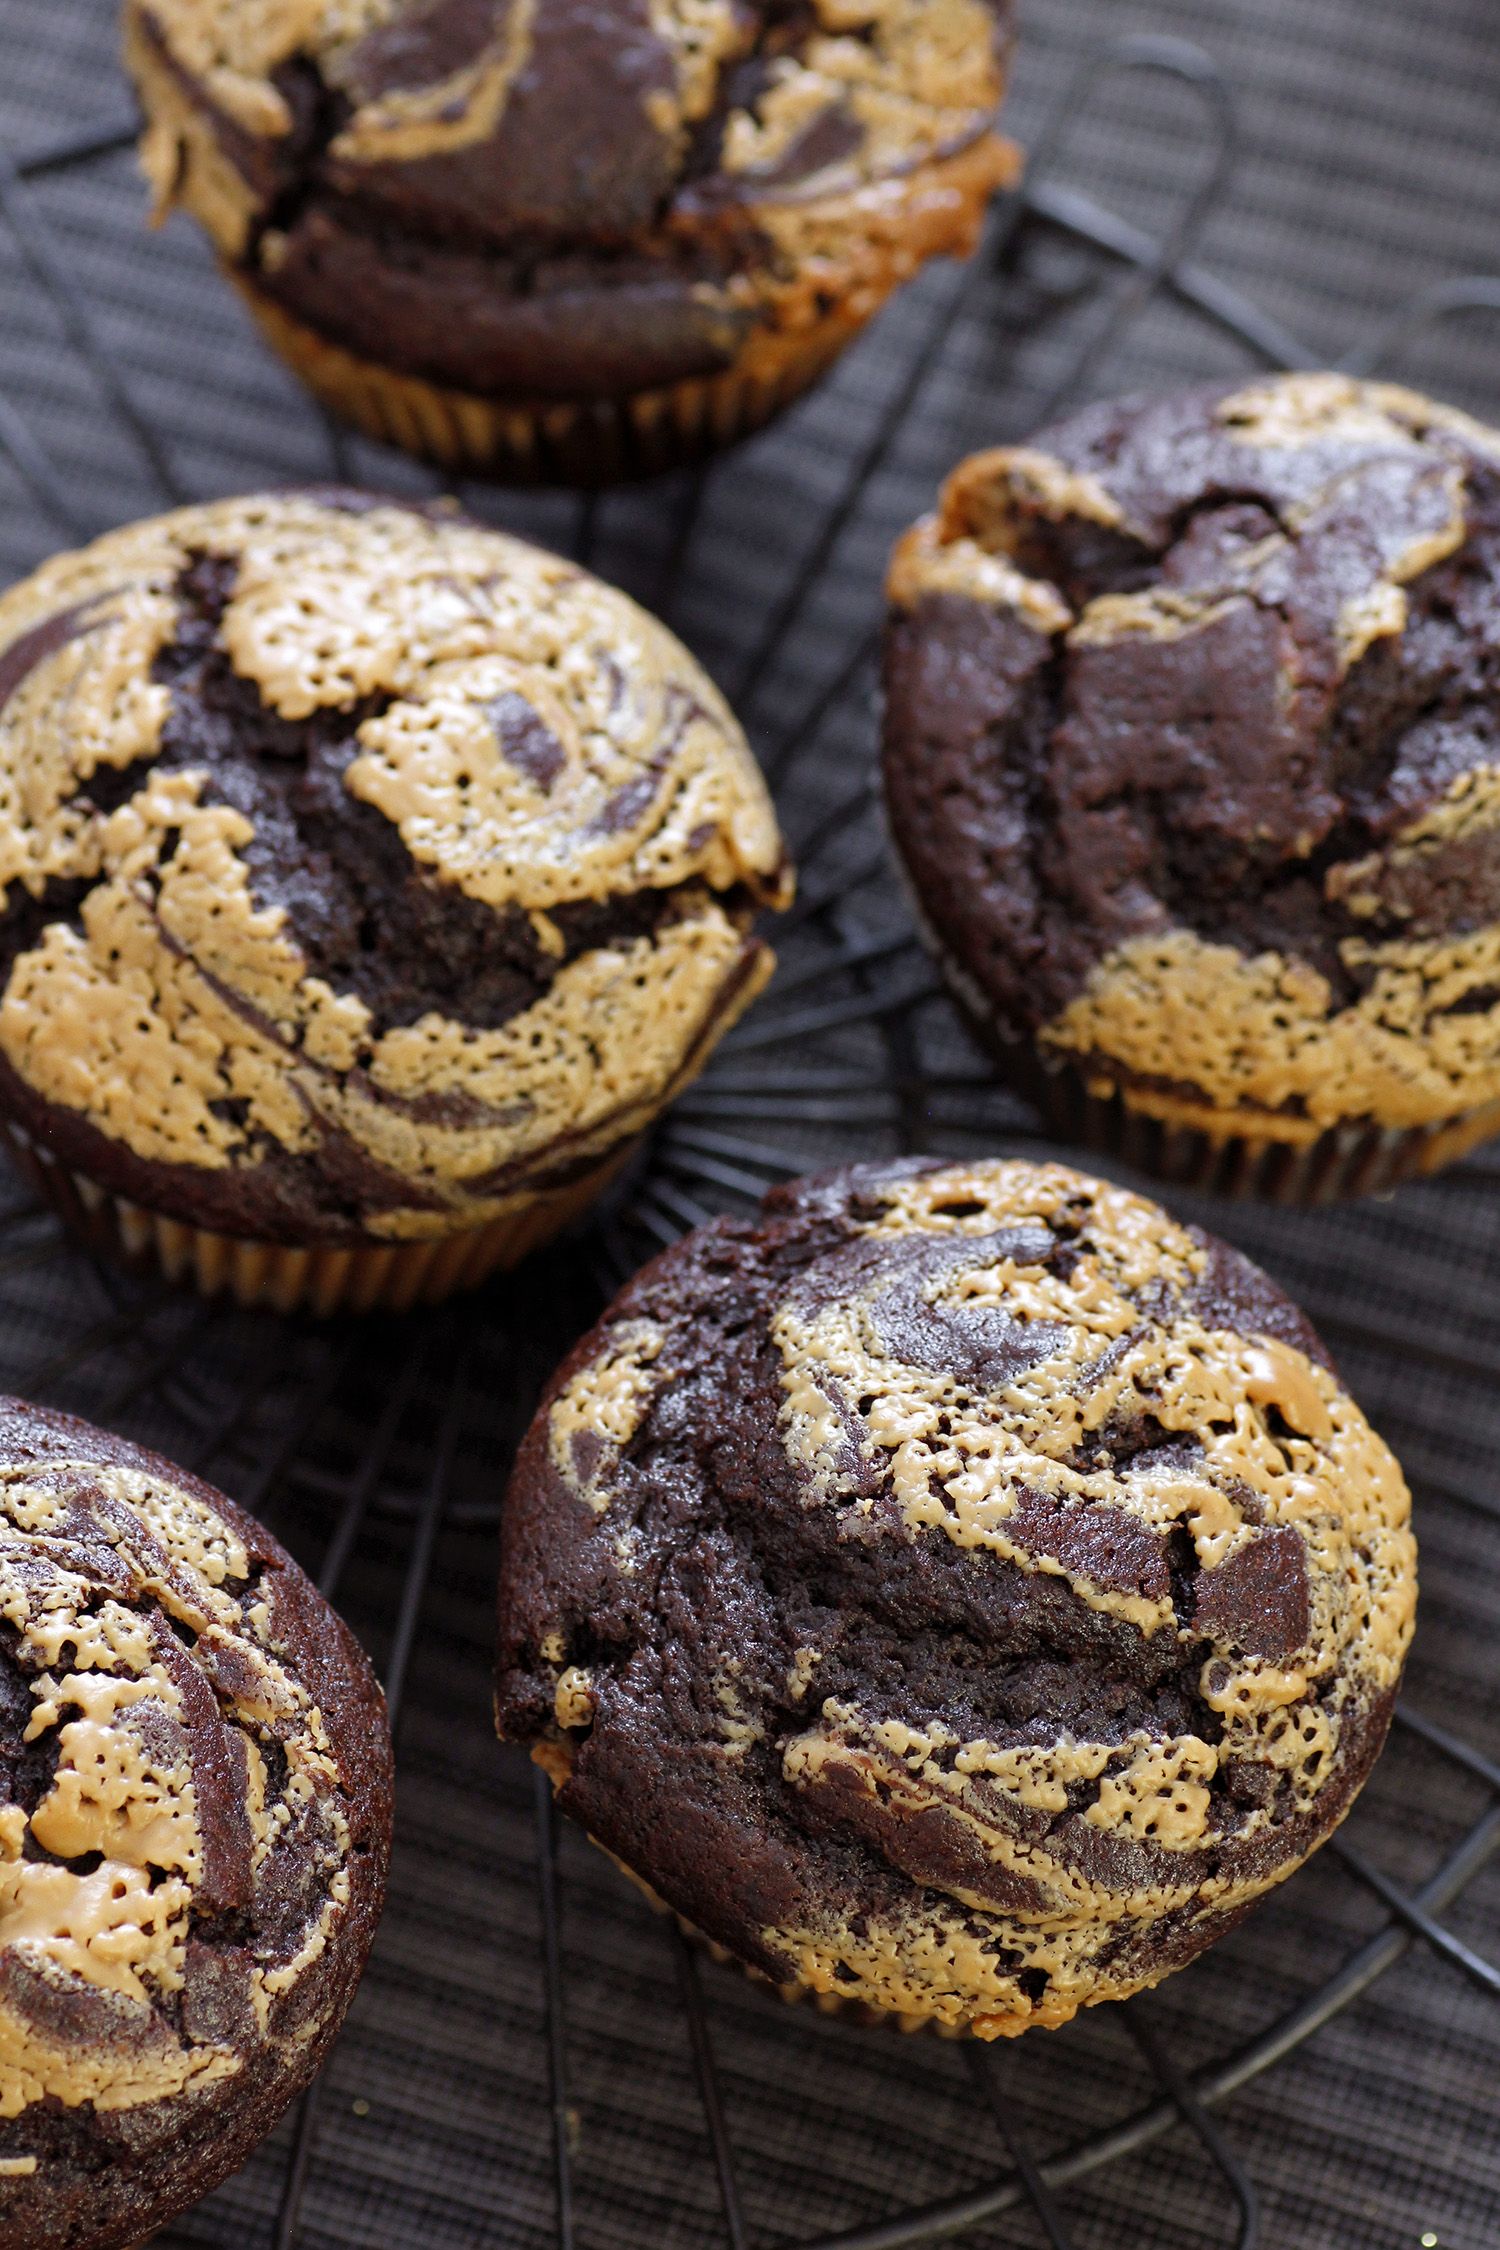 https://www.oogio.net/wp-content/uploads/2018/06/marbles_chocolate_peanut_butter_muffins5-s.jpg